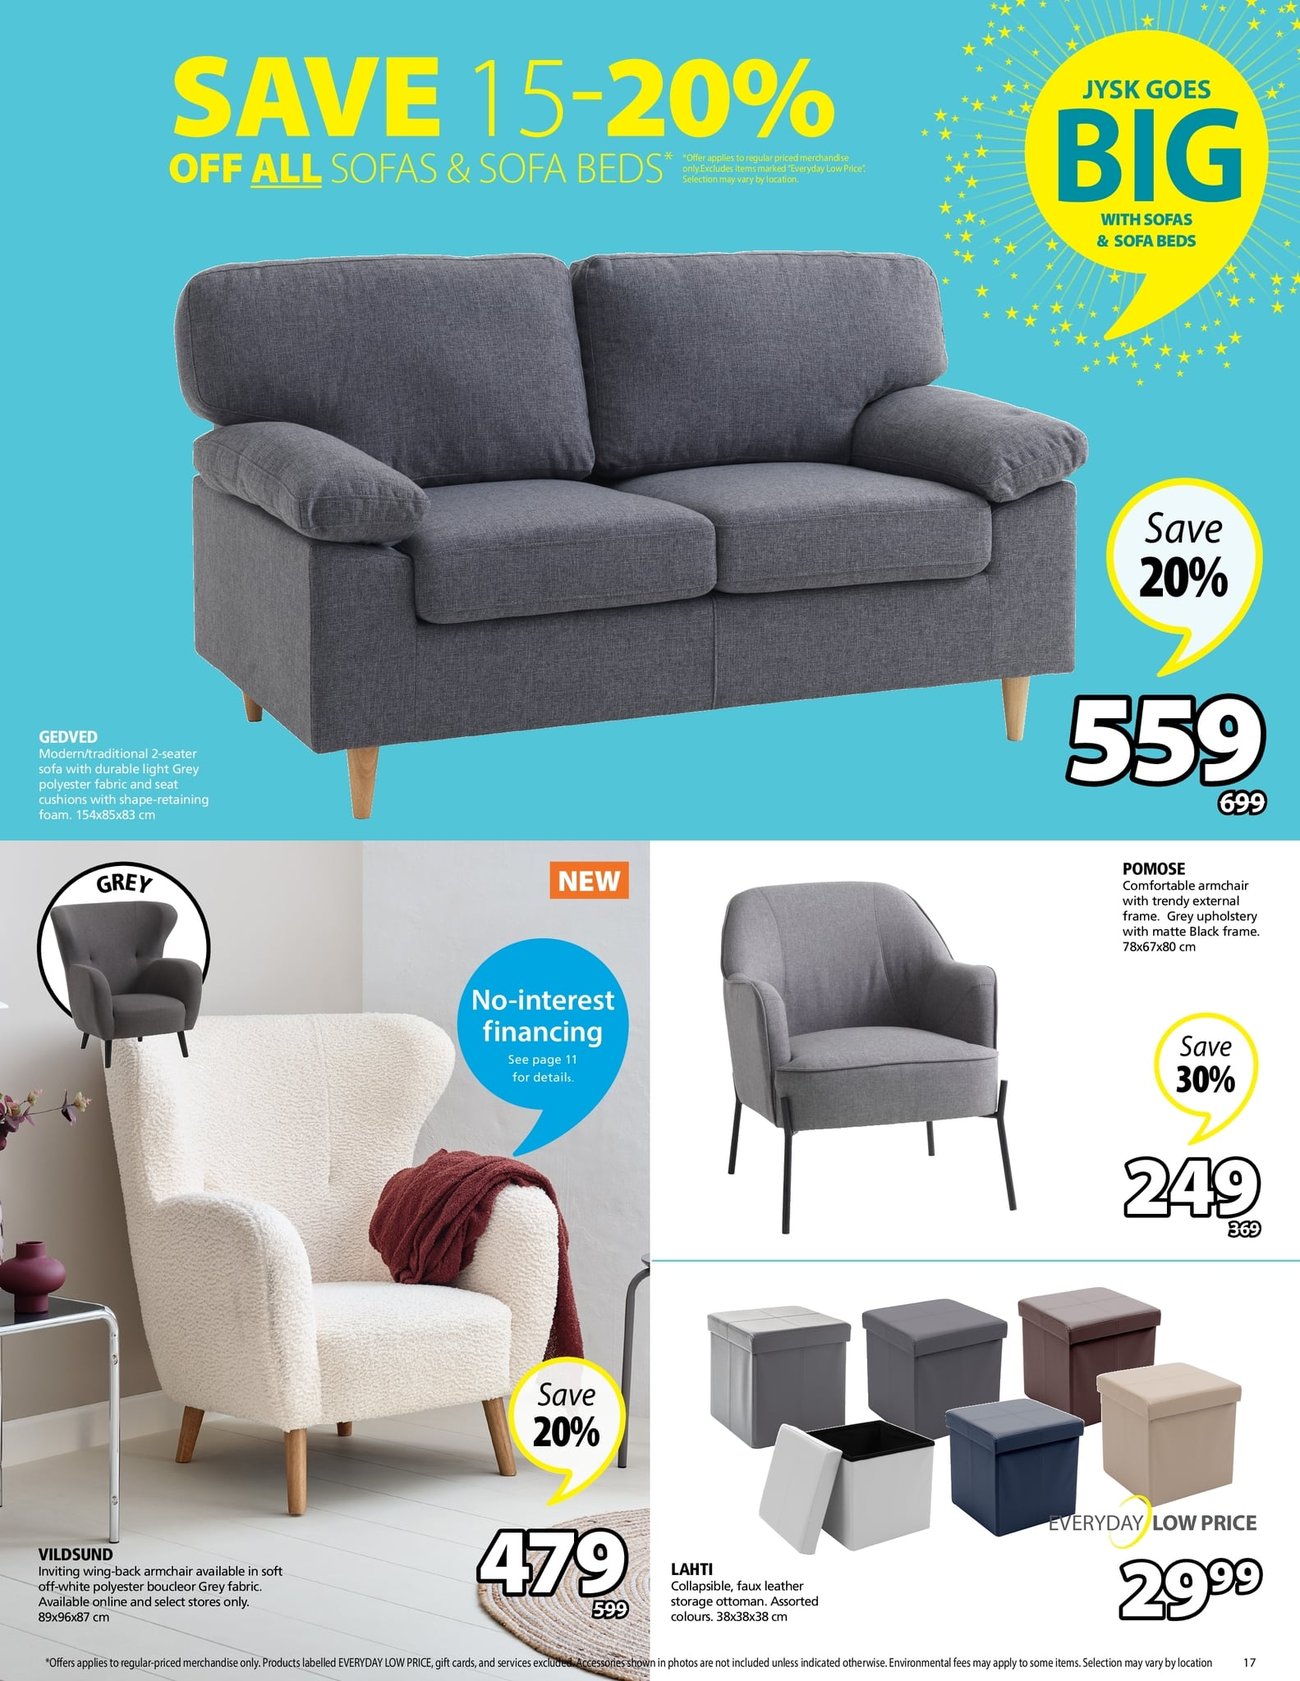 Jysk - Weekly Flyer Specials - Page 17